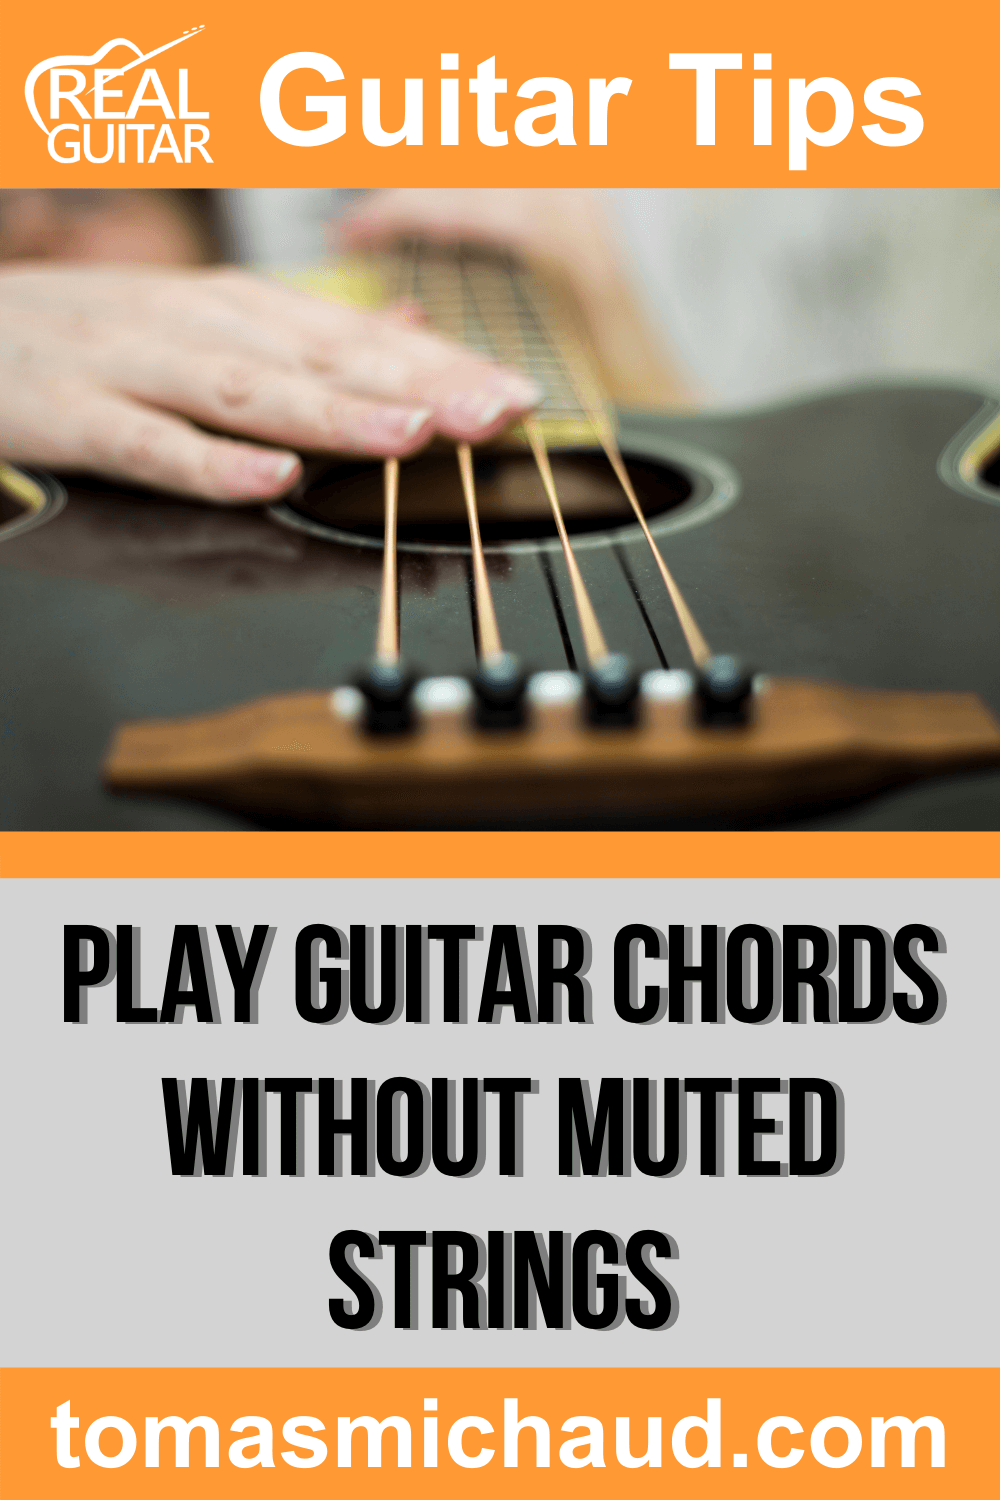 Play Guitar Chords Without Muted Strings